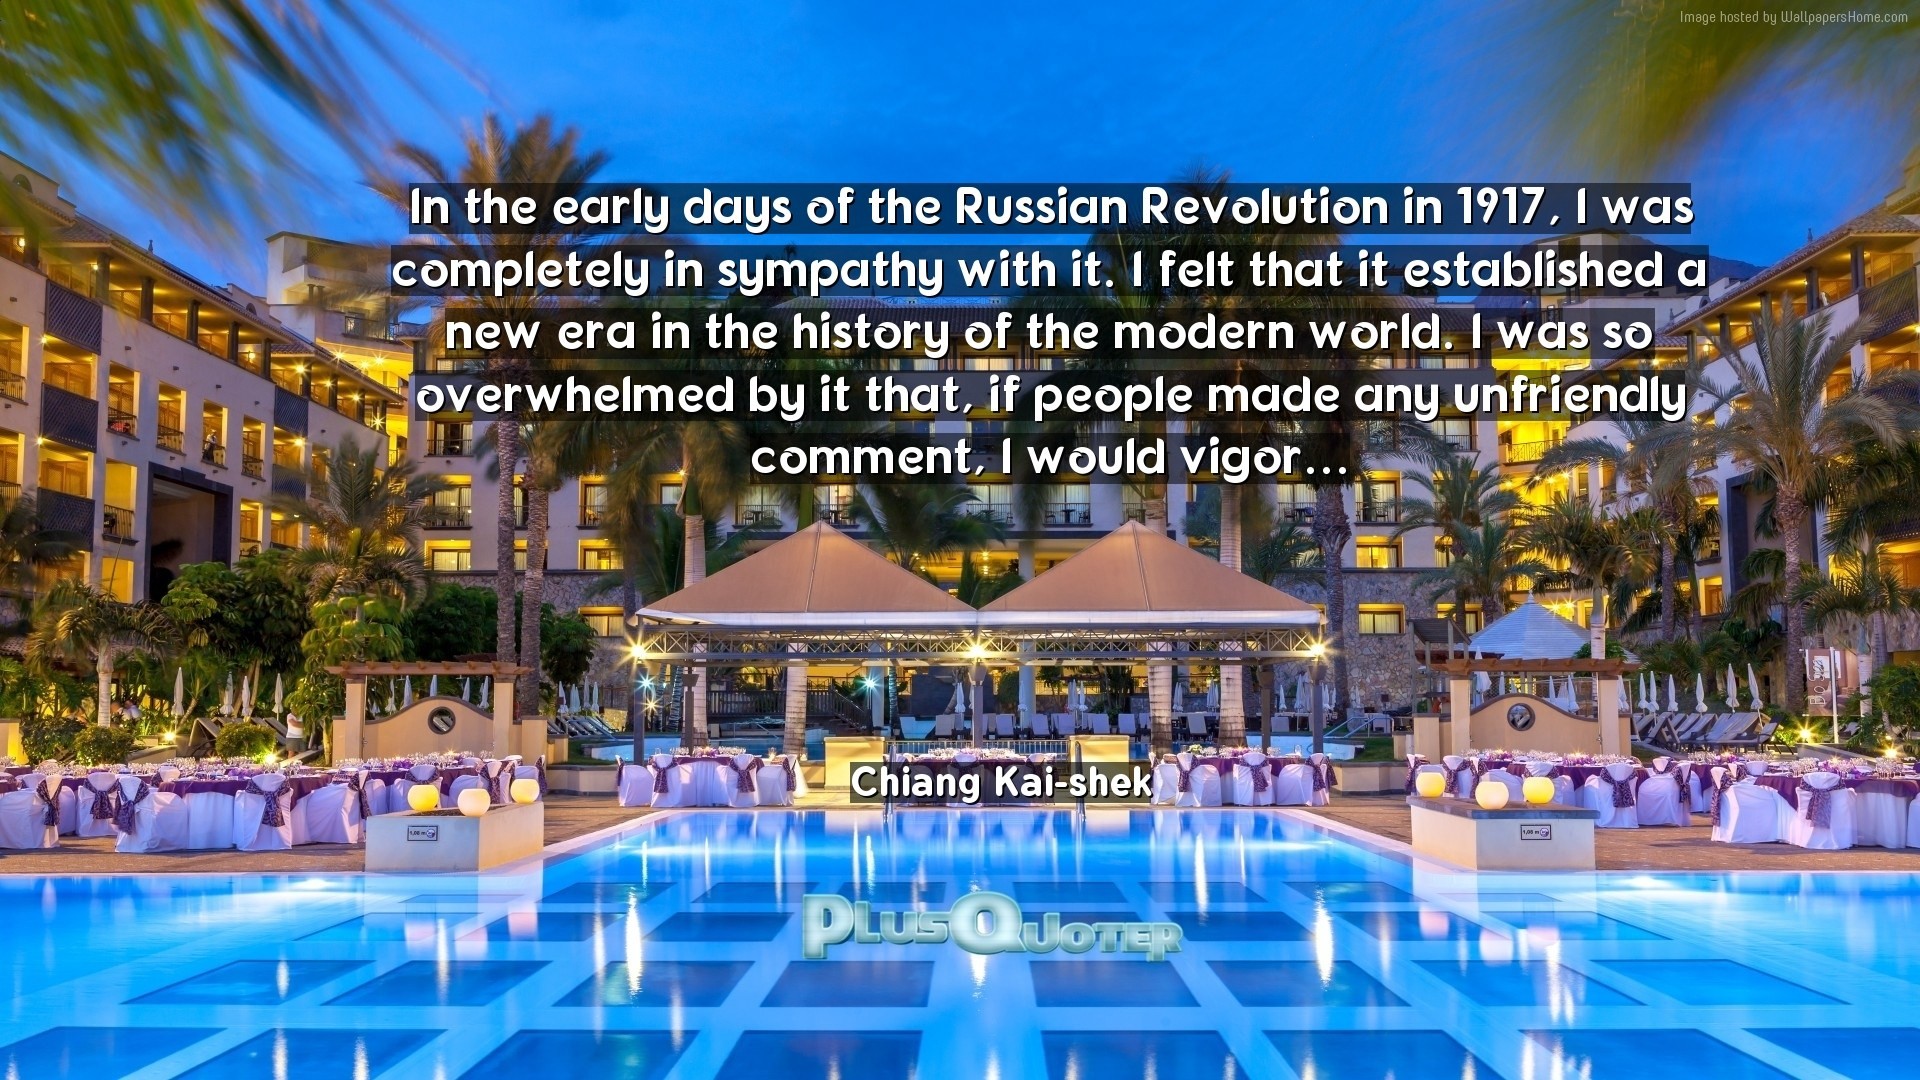 1920x1080 Download Wallpaper with inspirational Quotes- "In the early days of the  Russian Revolution in